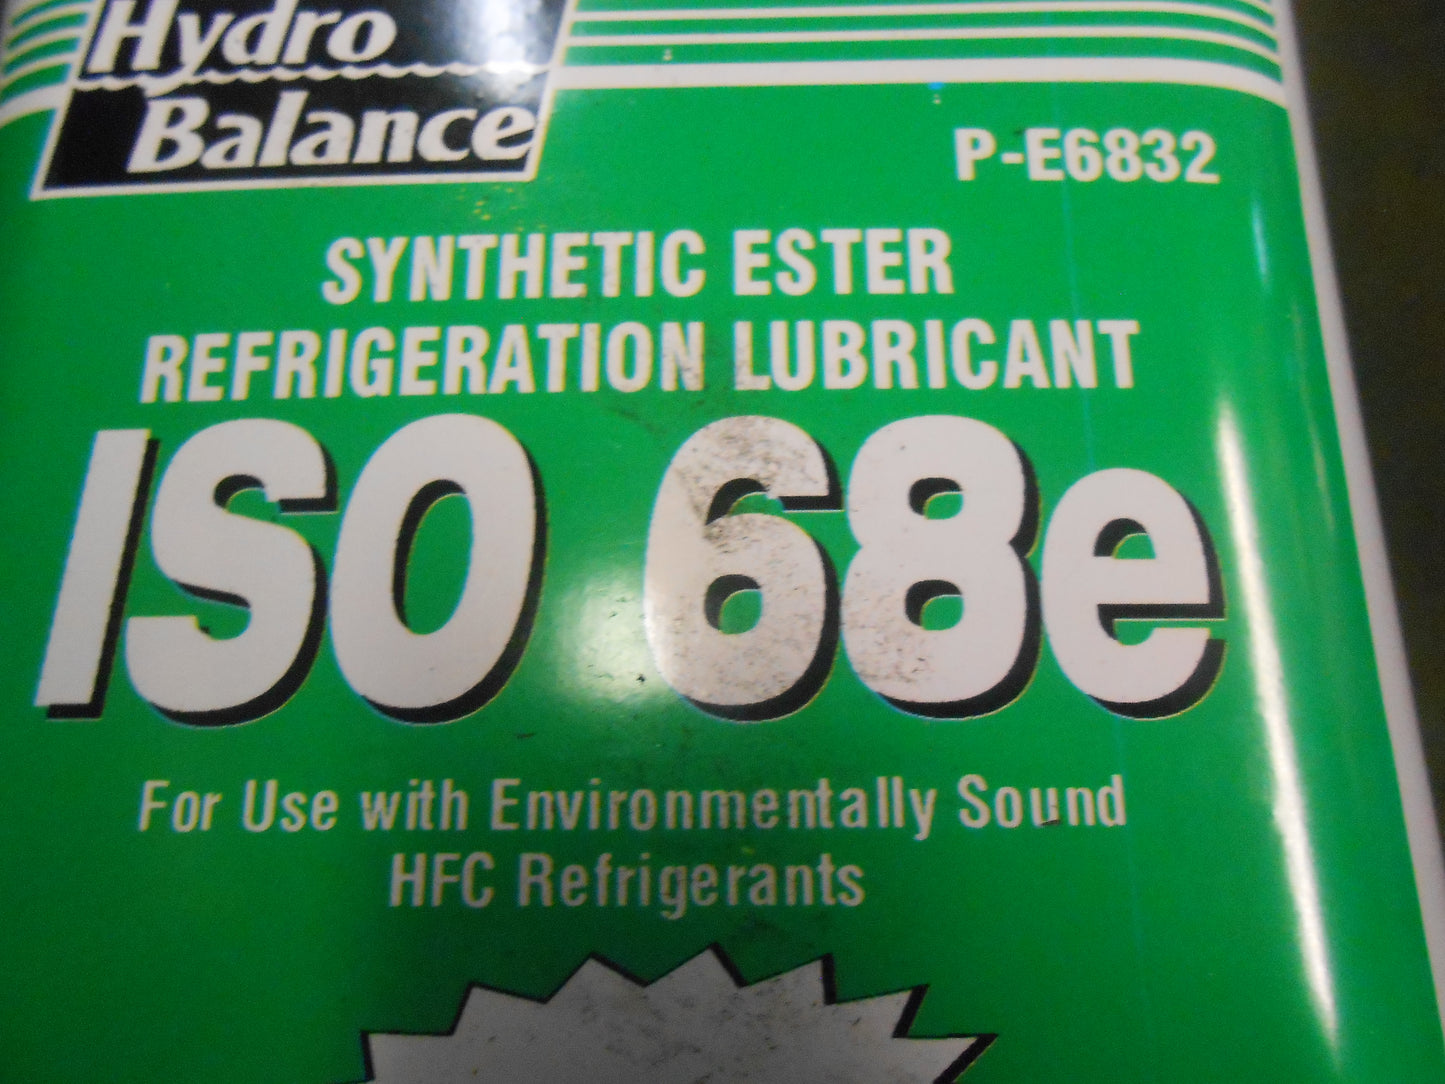 SYNTHETIC ESTER REFRIGERATION LUBRICANT 32 OZ